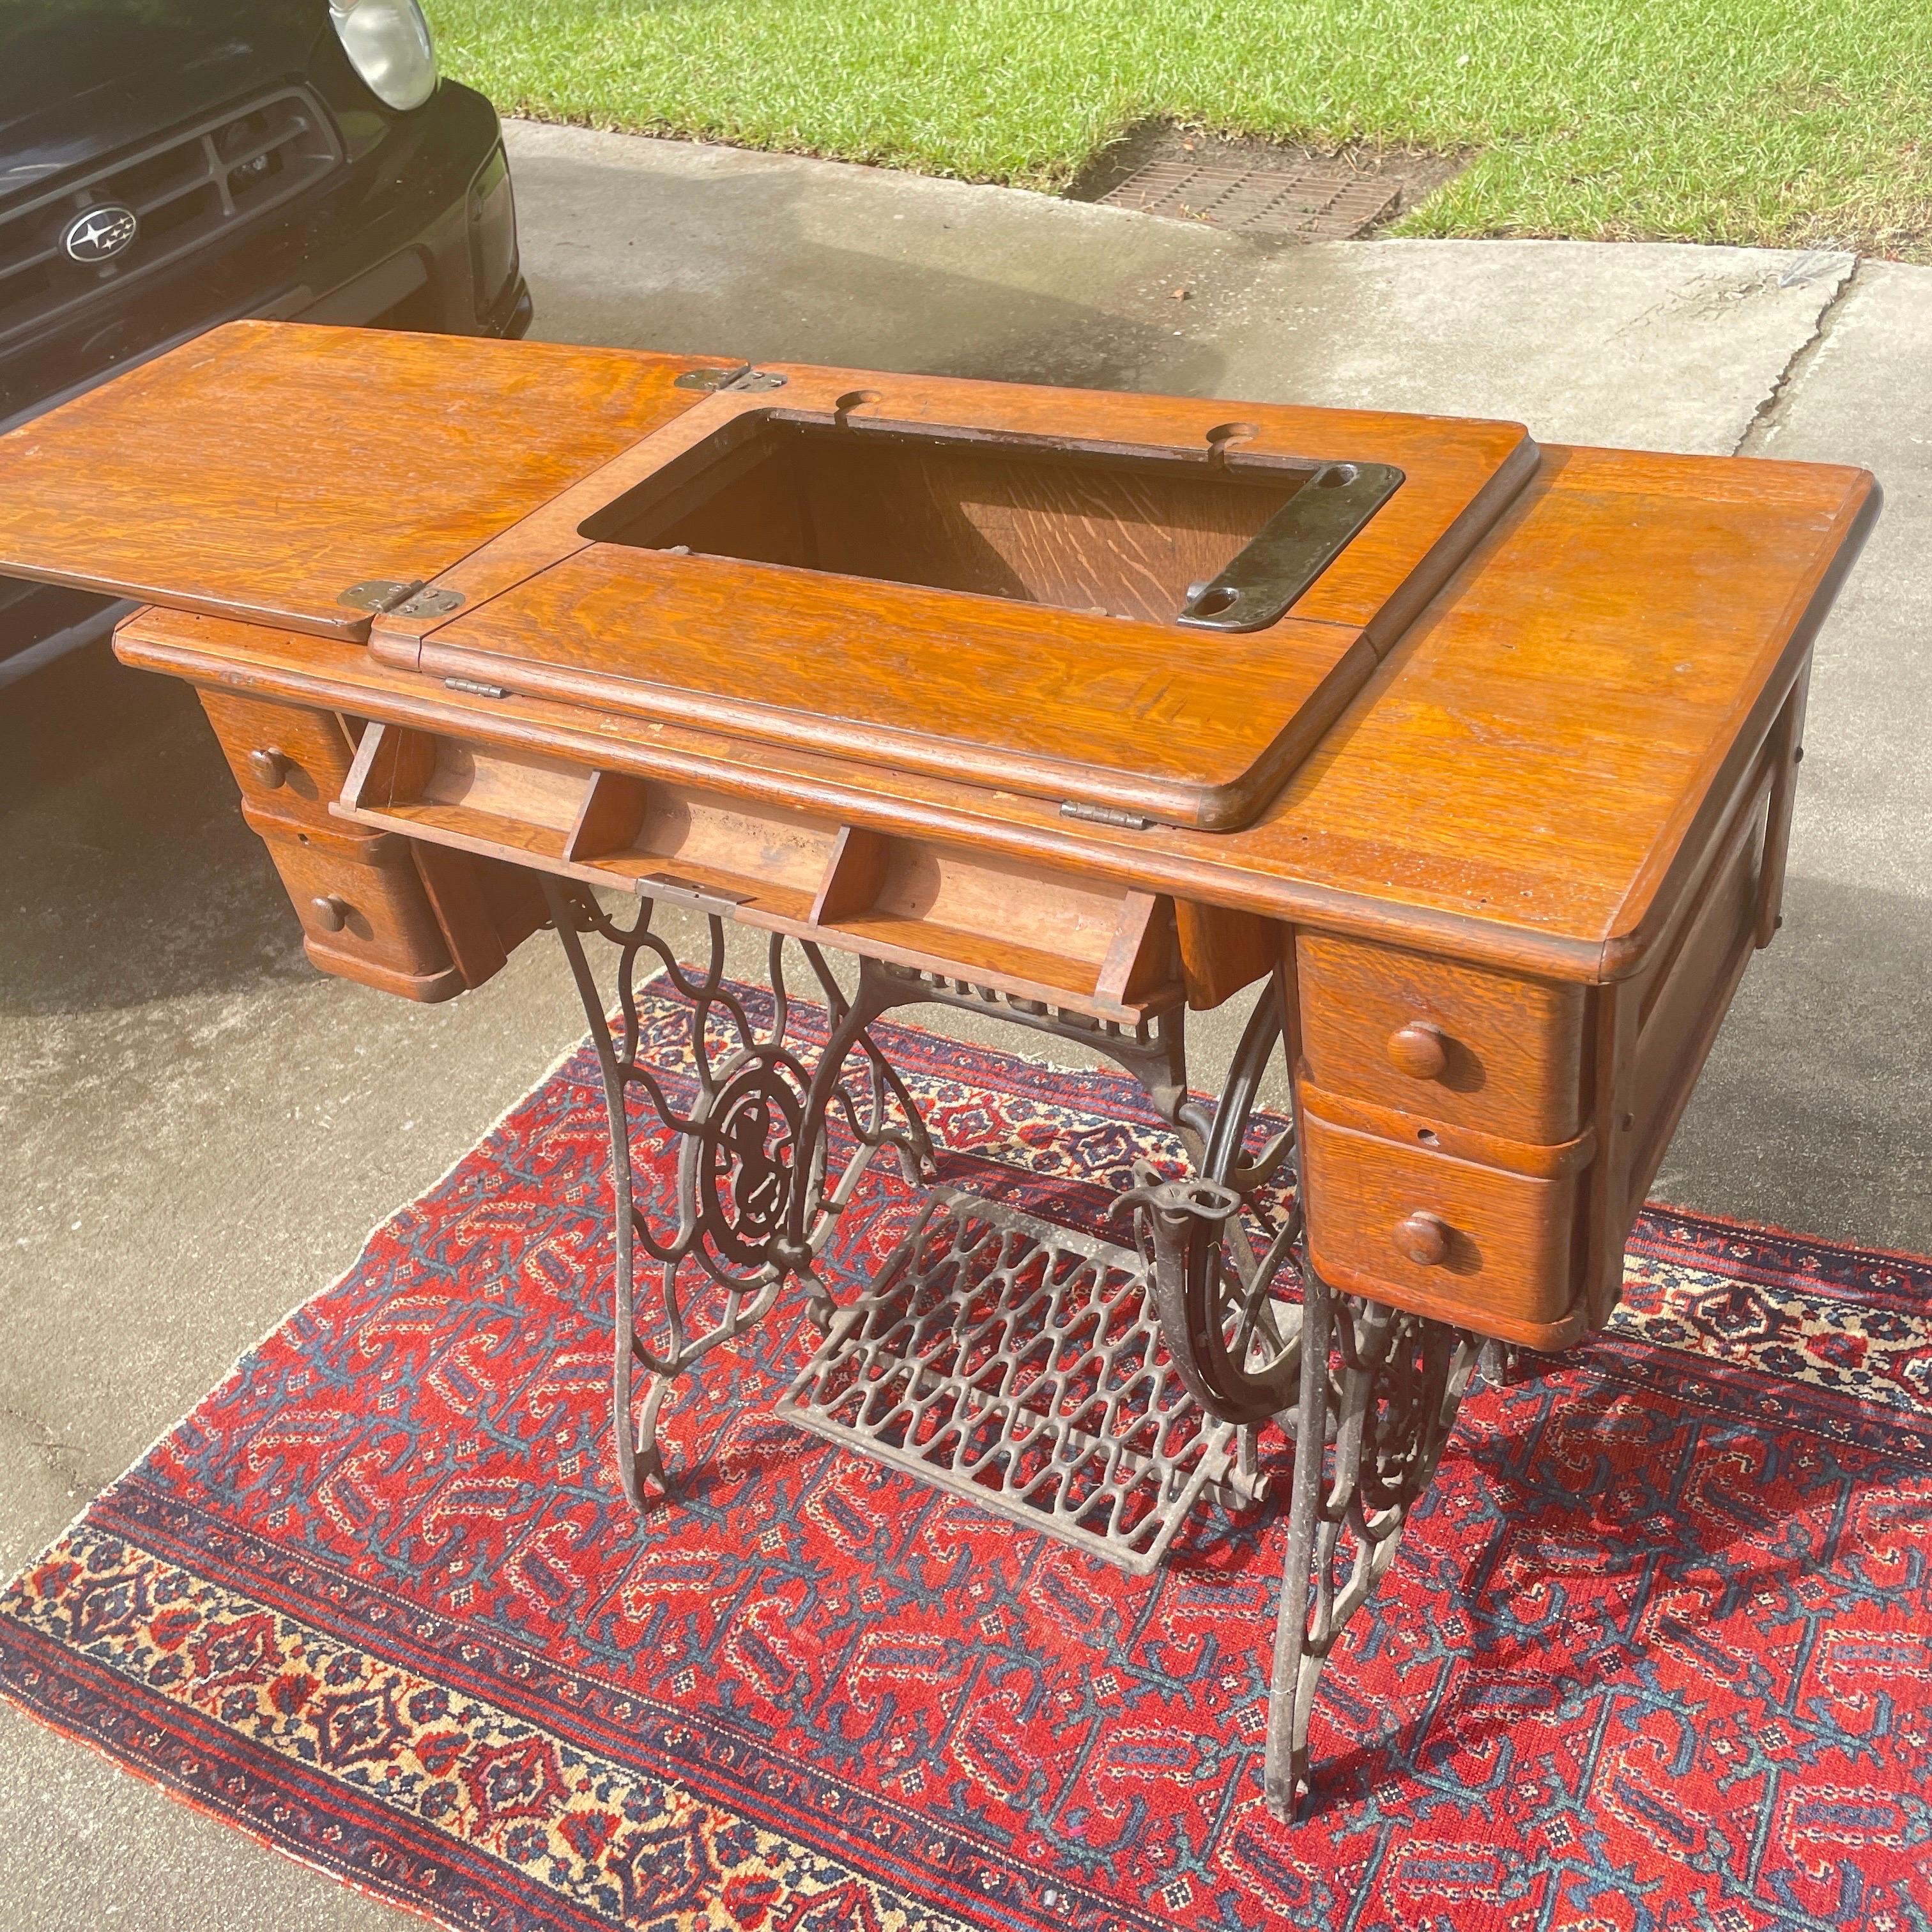 Vintage Singer Sewing Machine - Work Table For Sale 7